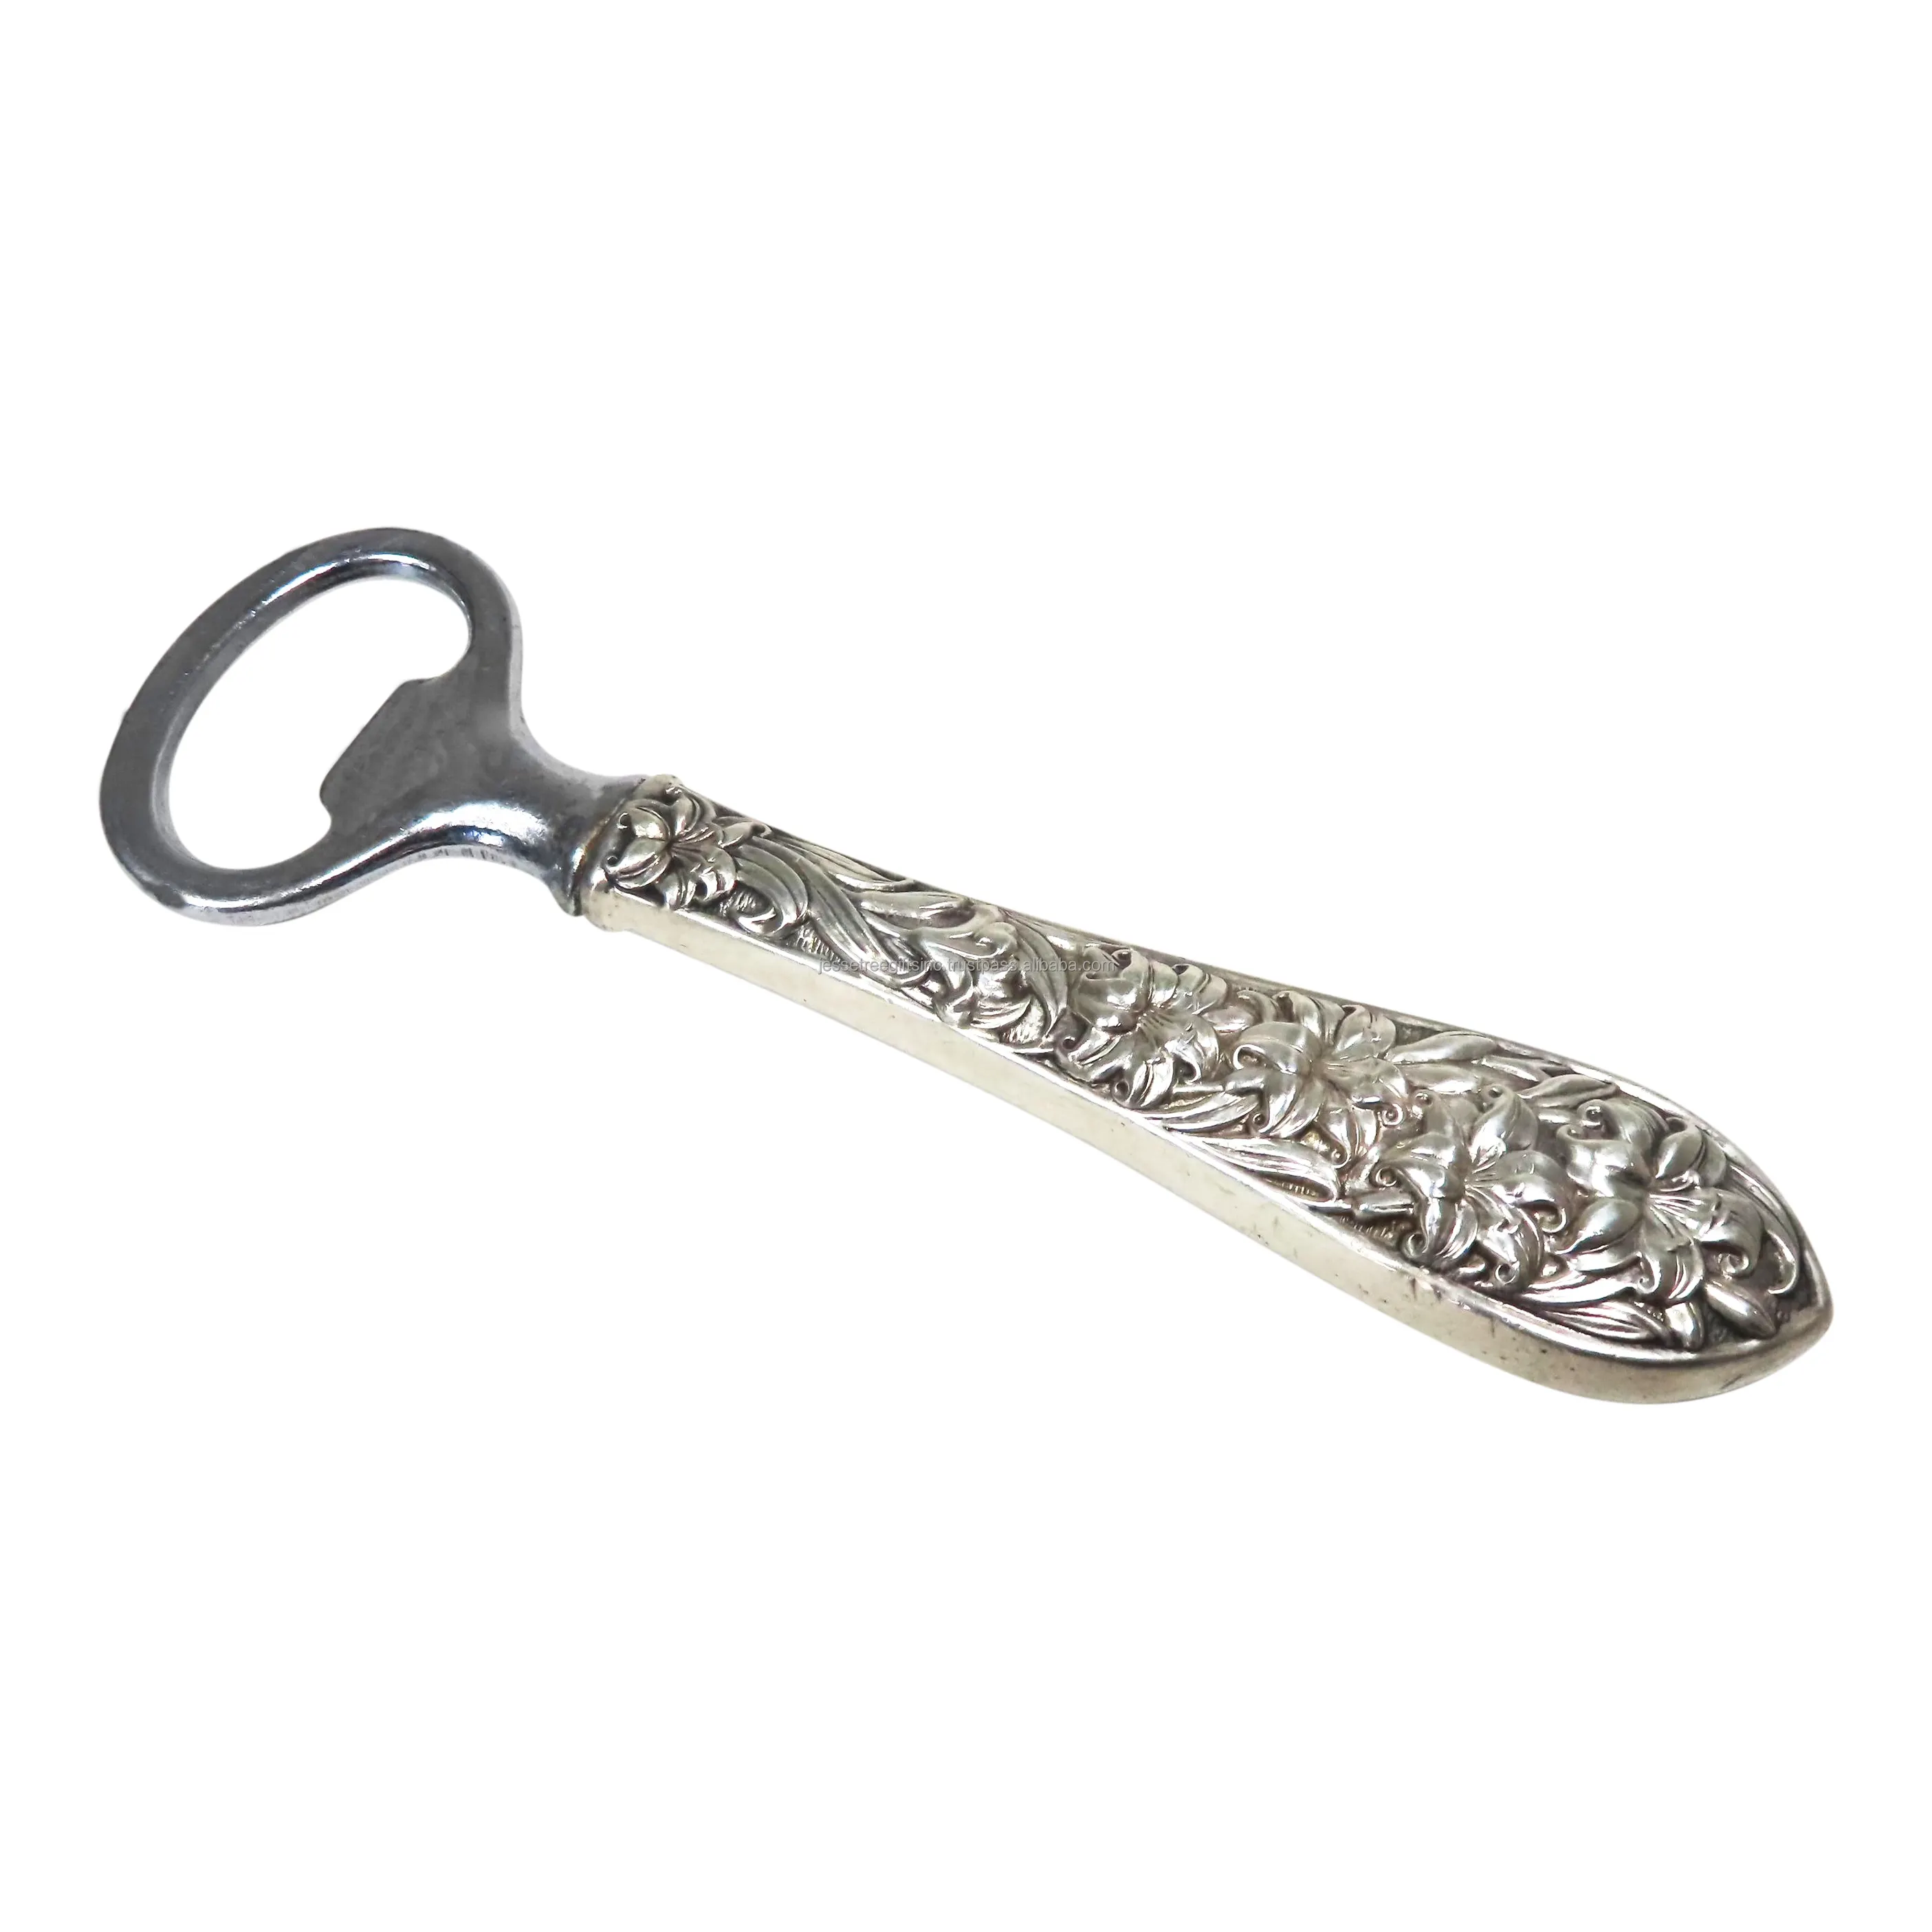 Metal Bottle Opener With Antique Silver Finishing Embossed Floral Design Excellent Quality For Opener Wholesale Price